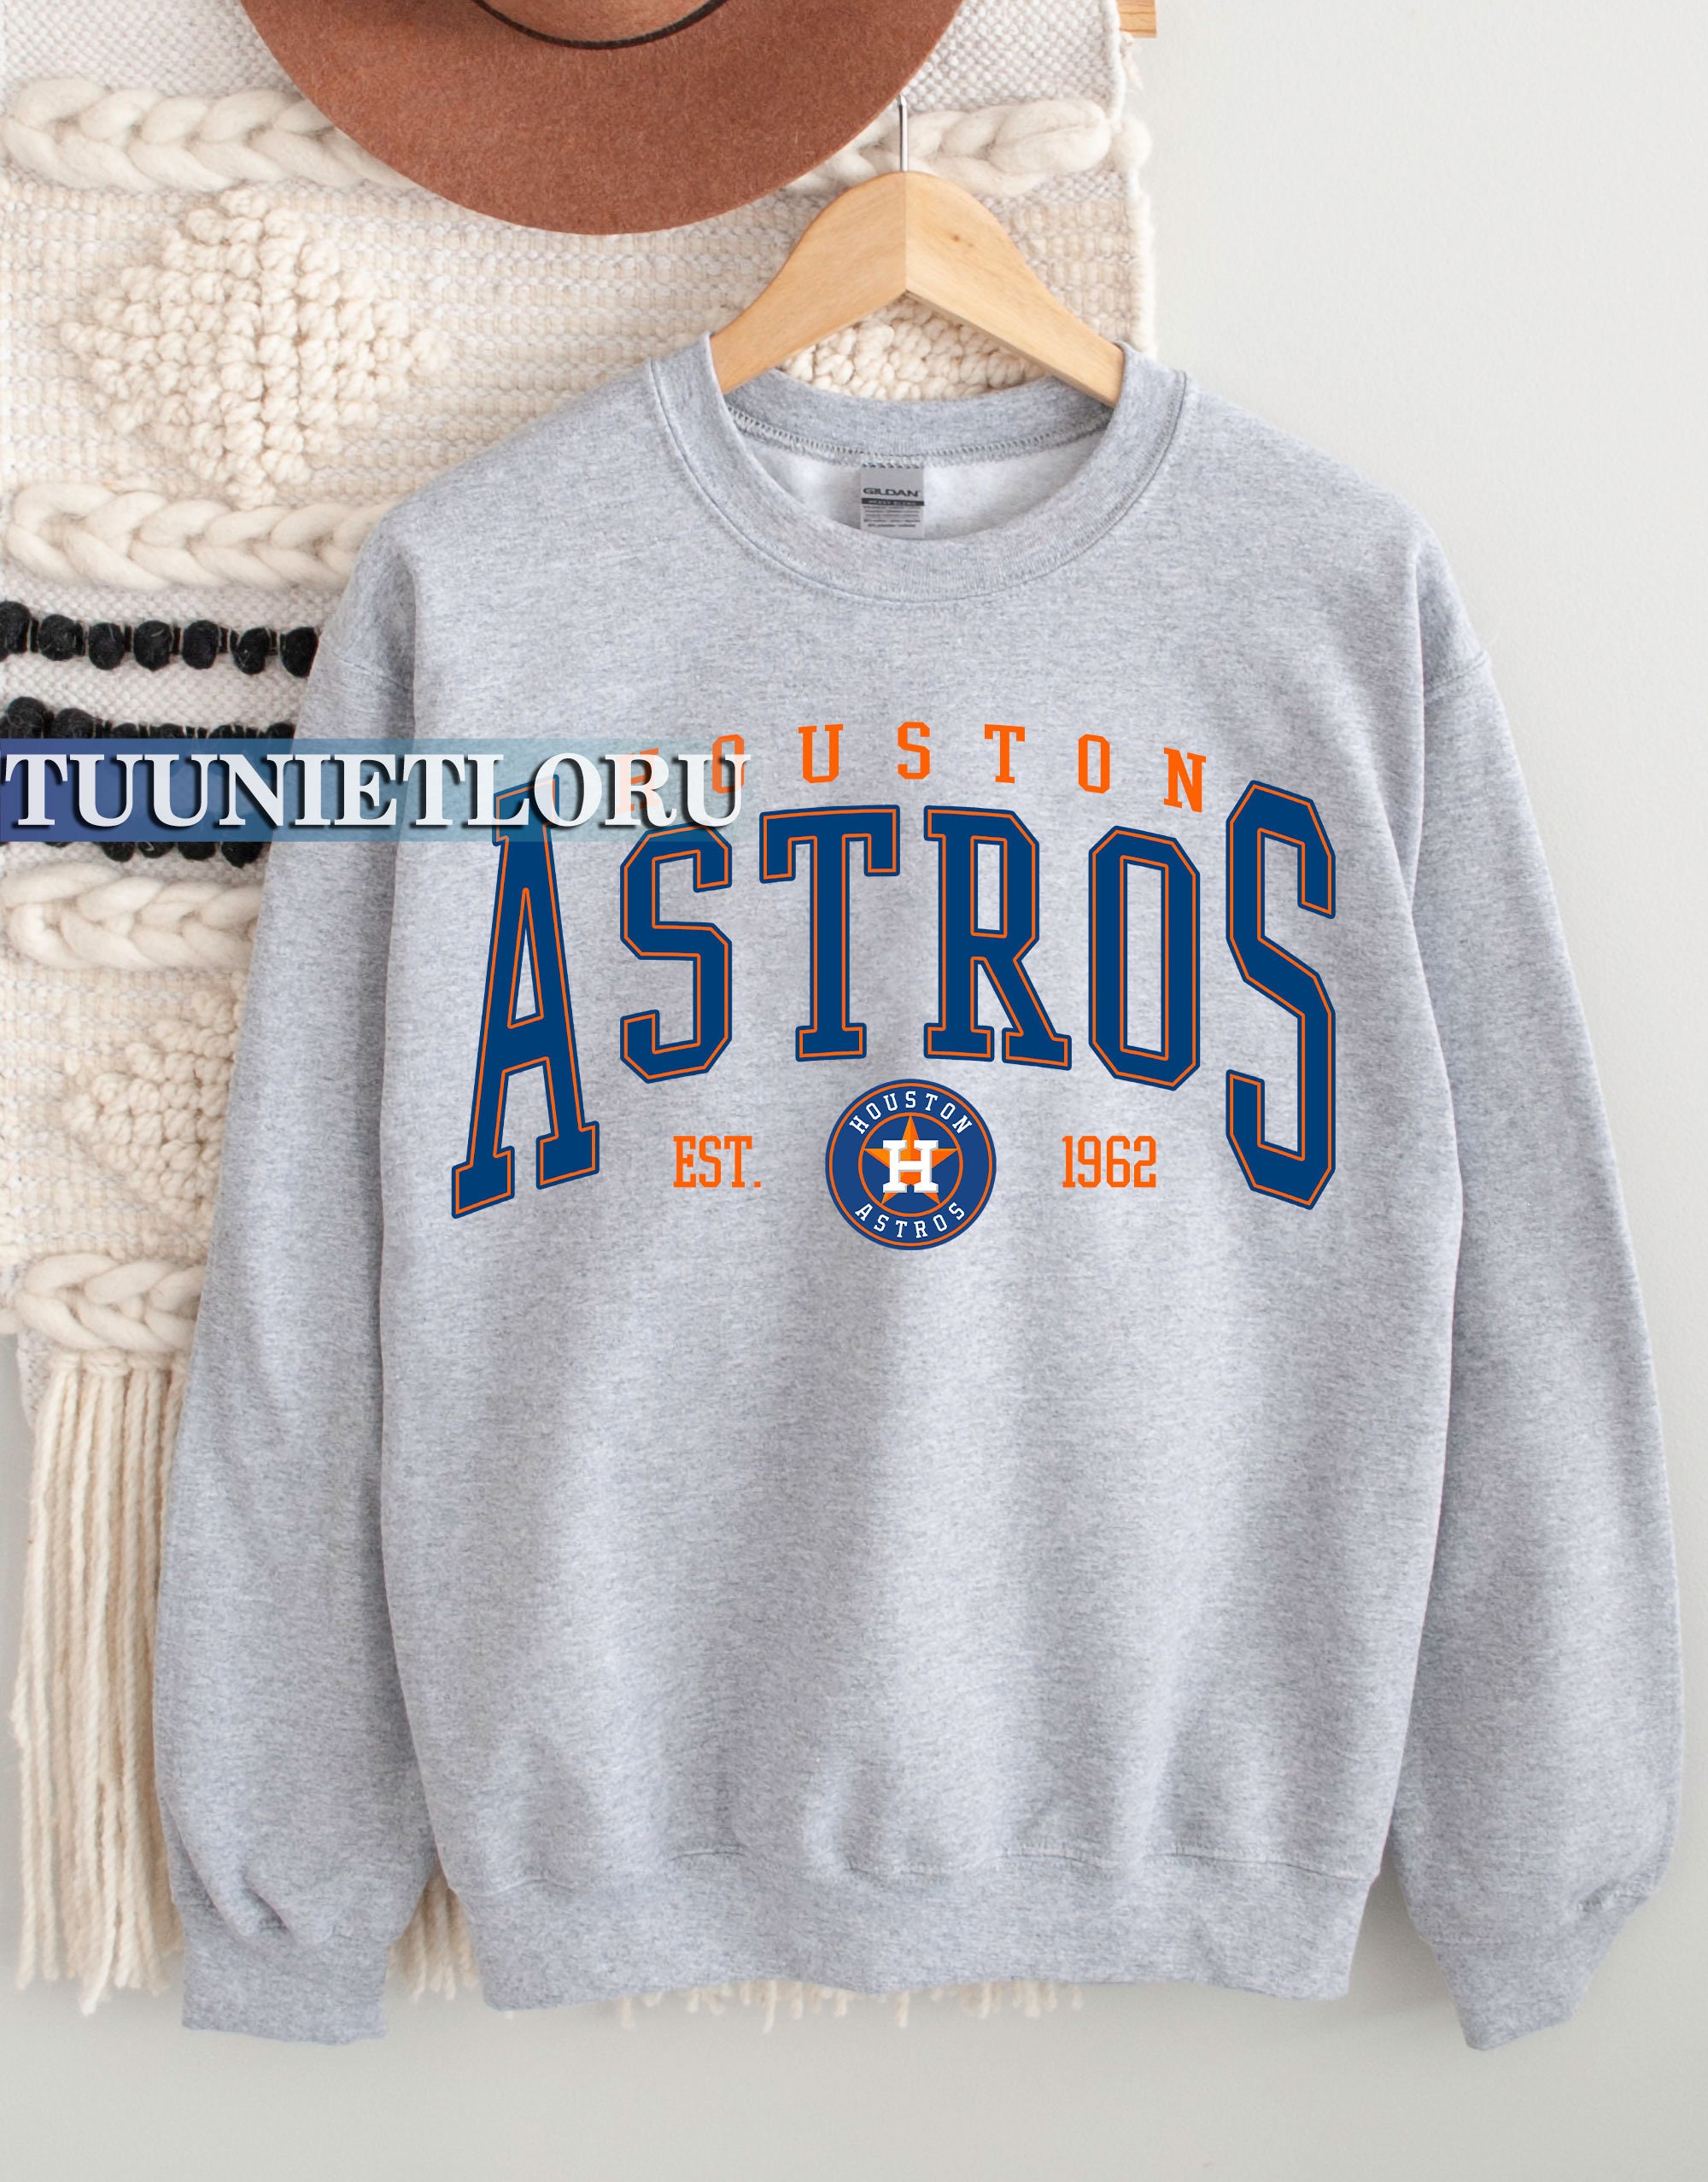 Astros Sweater All Over Printed Artificial Wool Sweatshirt Cosplay